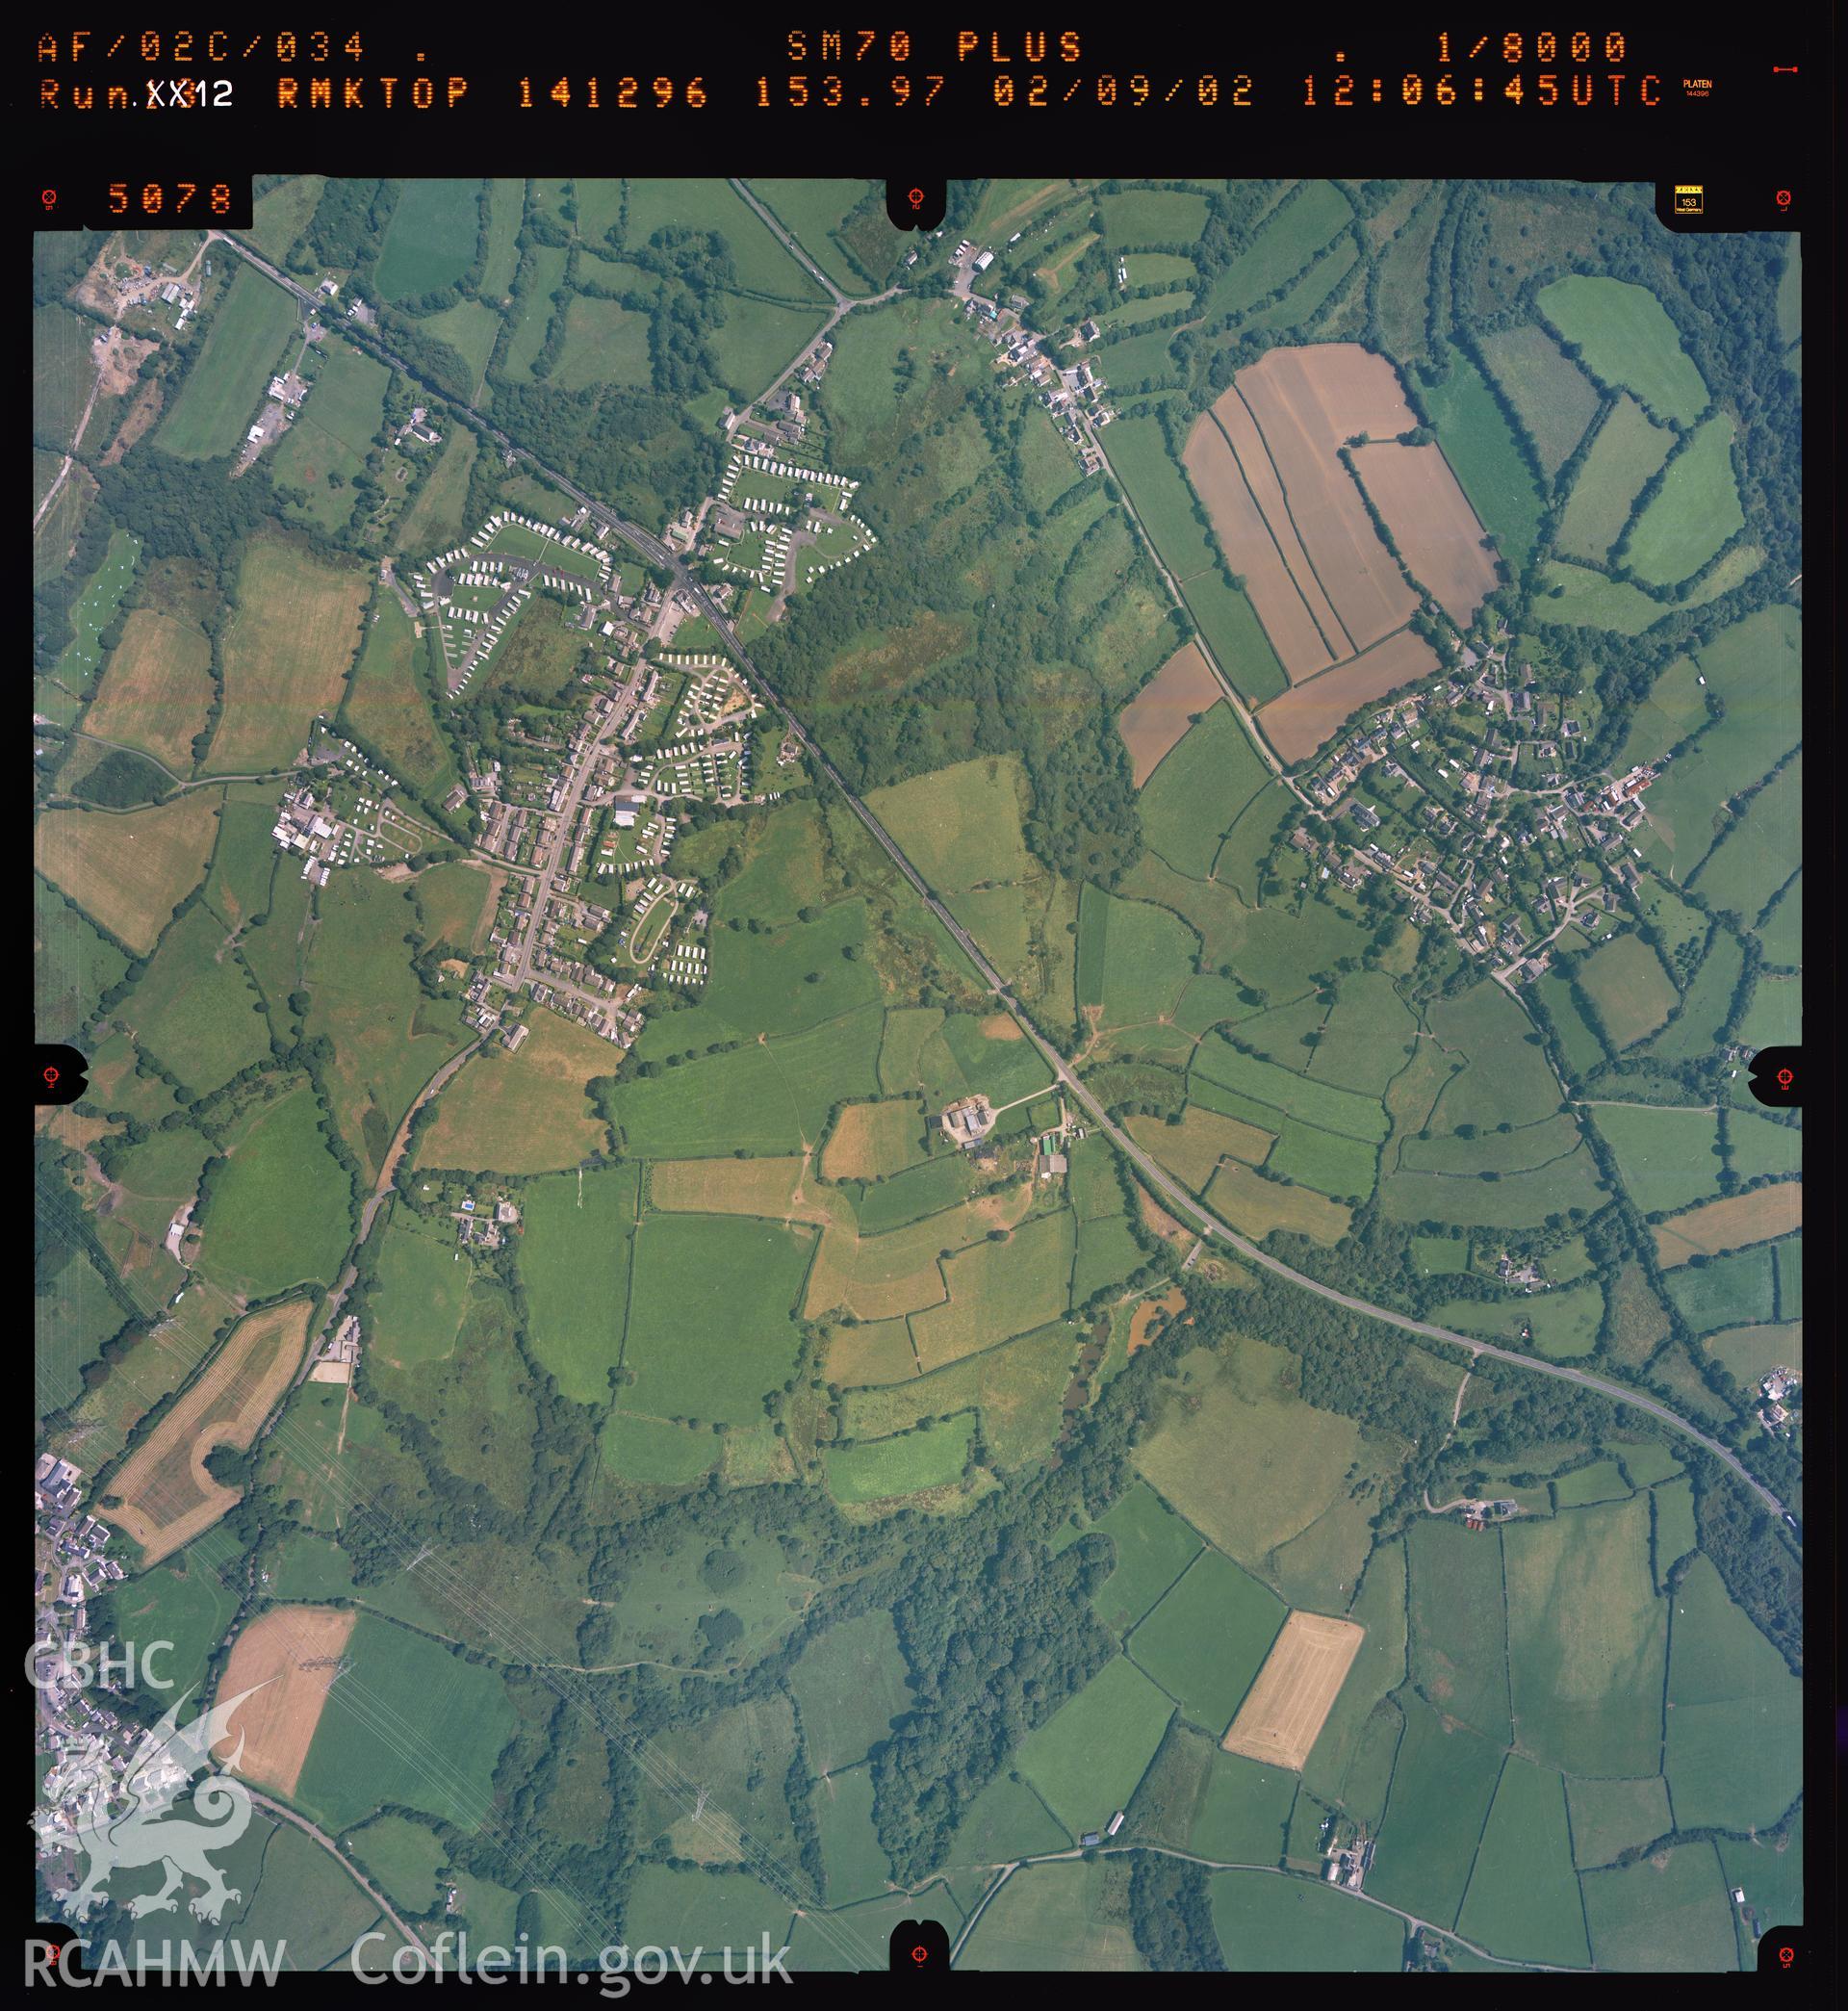 Digitized copy of a colour aerial photograph showing the Broadmoor area in Pembs taken by Ordnance Survey, 2002.